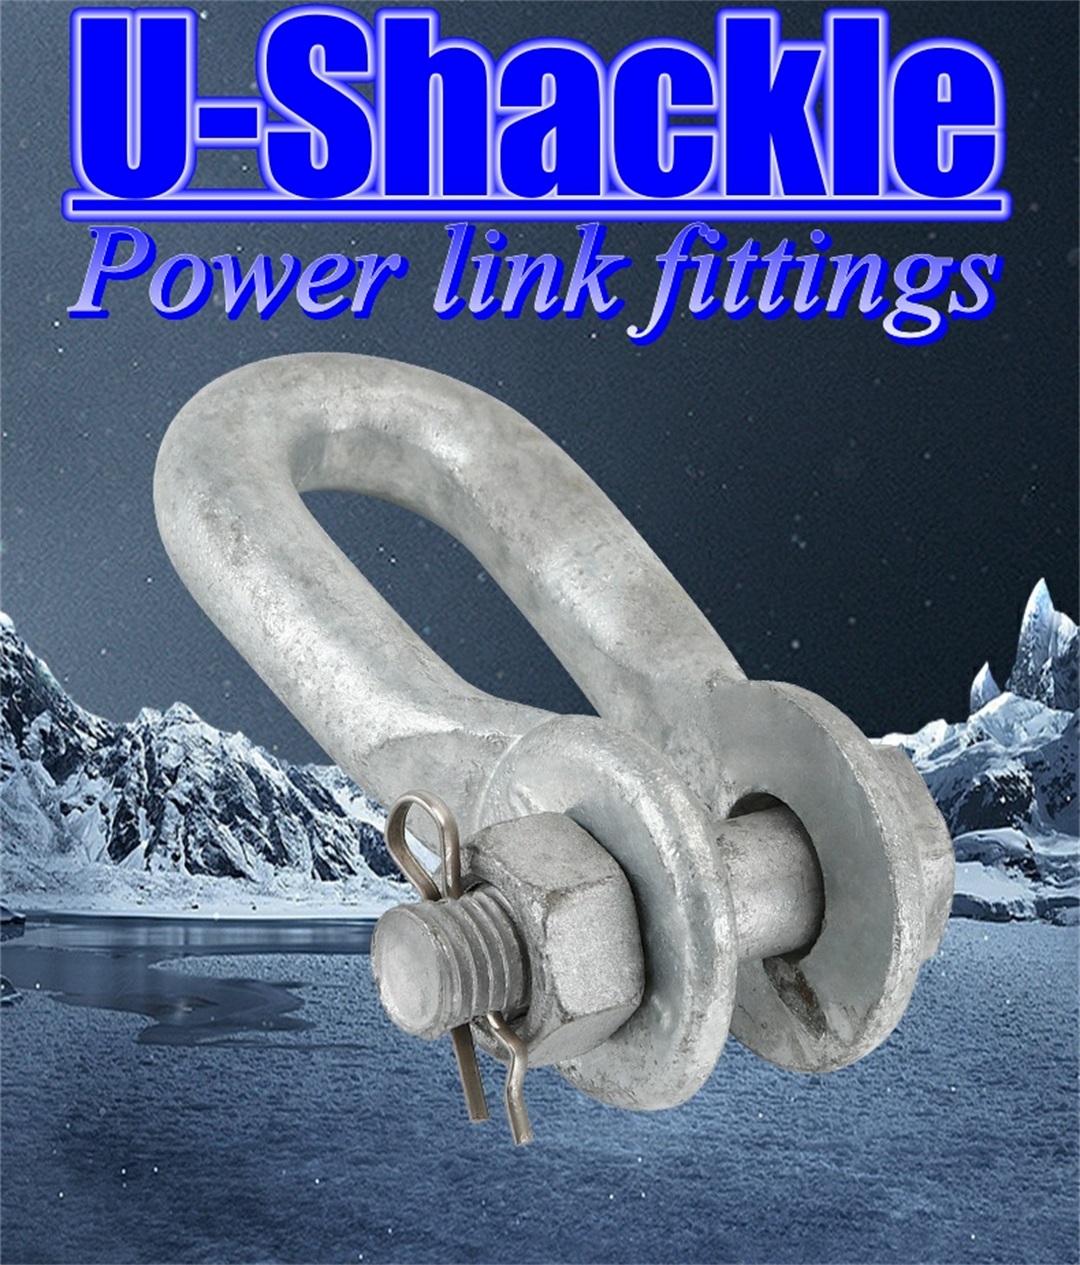 U shackle  Power link fittings for overhead lines